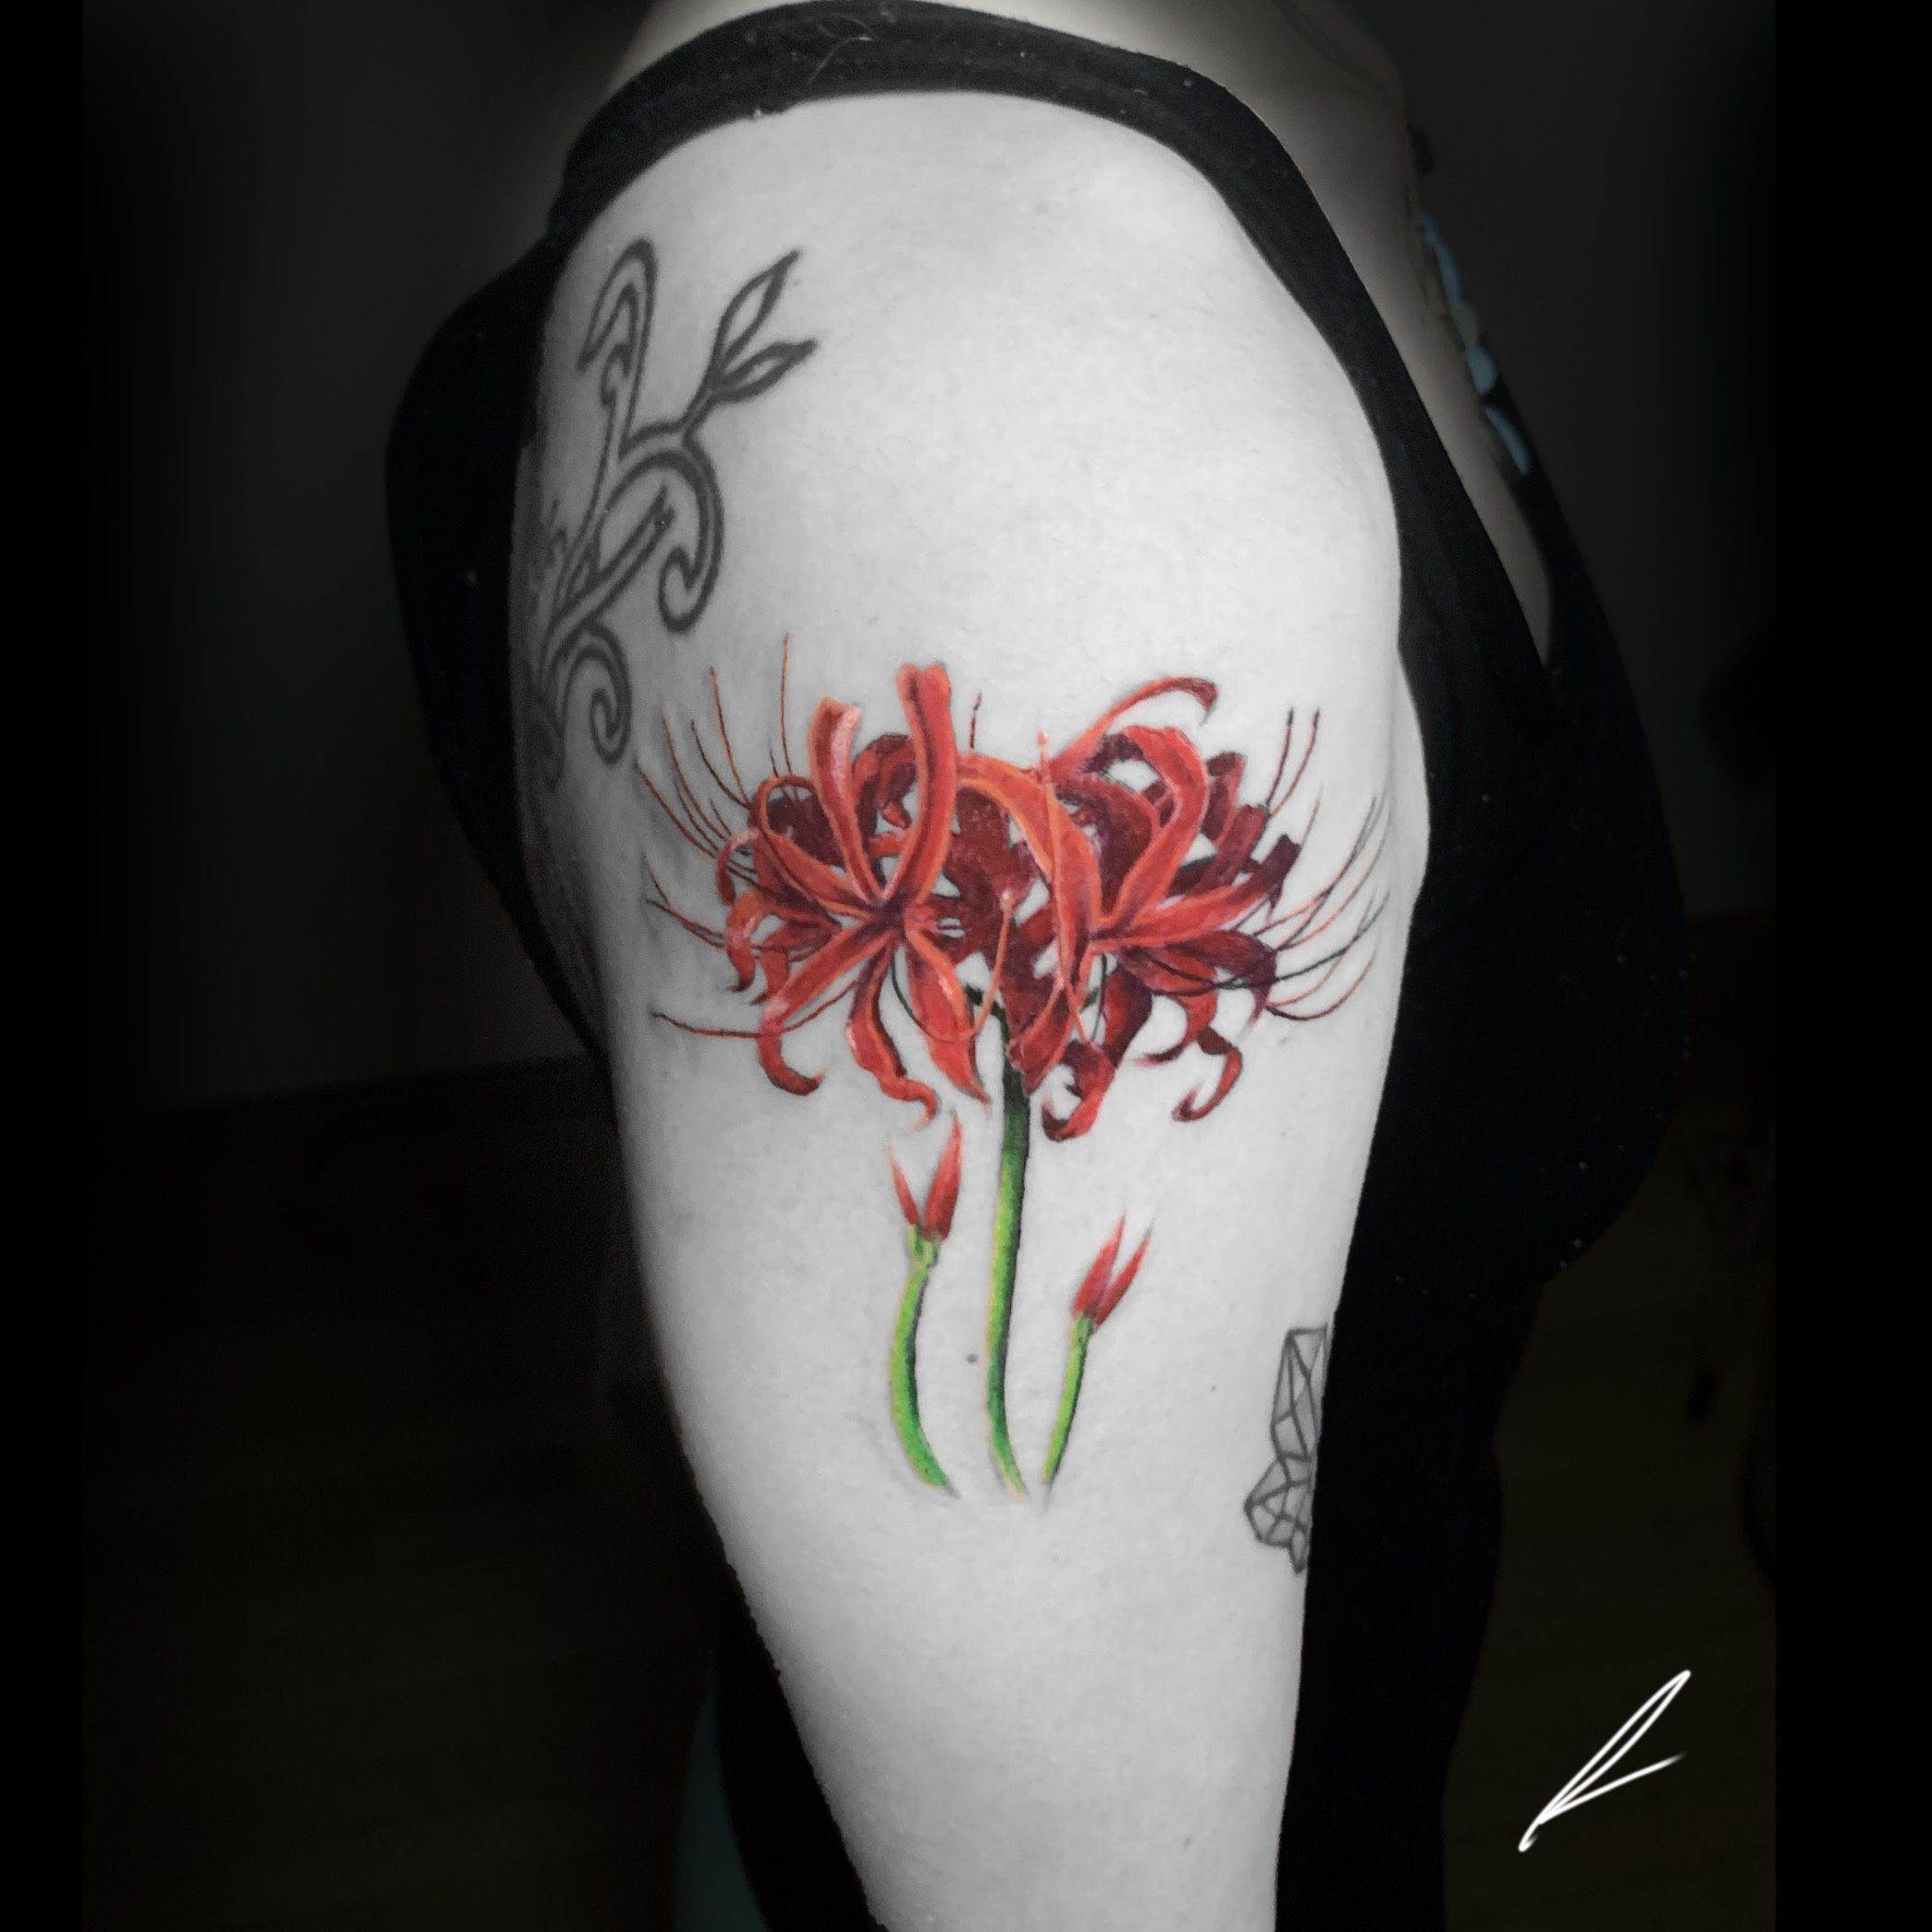 Spider Lily SemiPermanent Tattoo Lasts 12 weeks Painless and easy to  apply Organic ink Browse more or create your own  Inkbox   SemiPermanent Tattoos